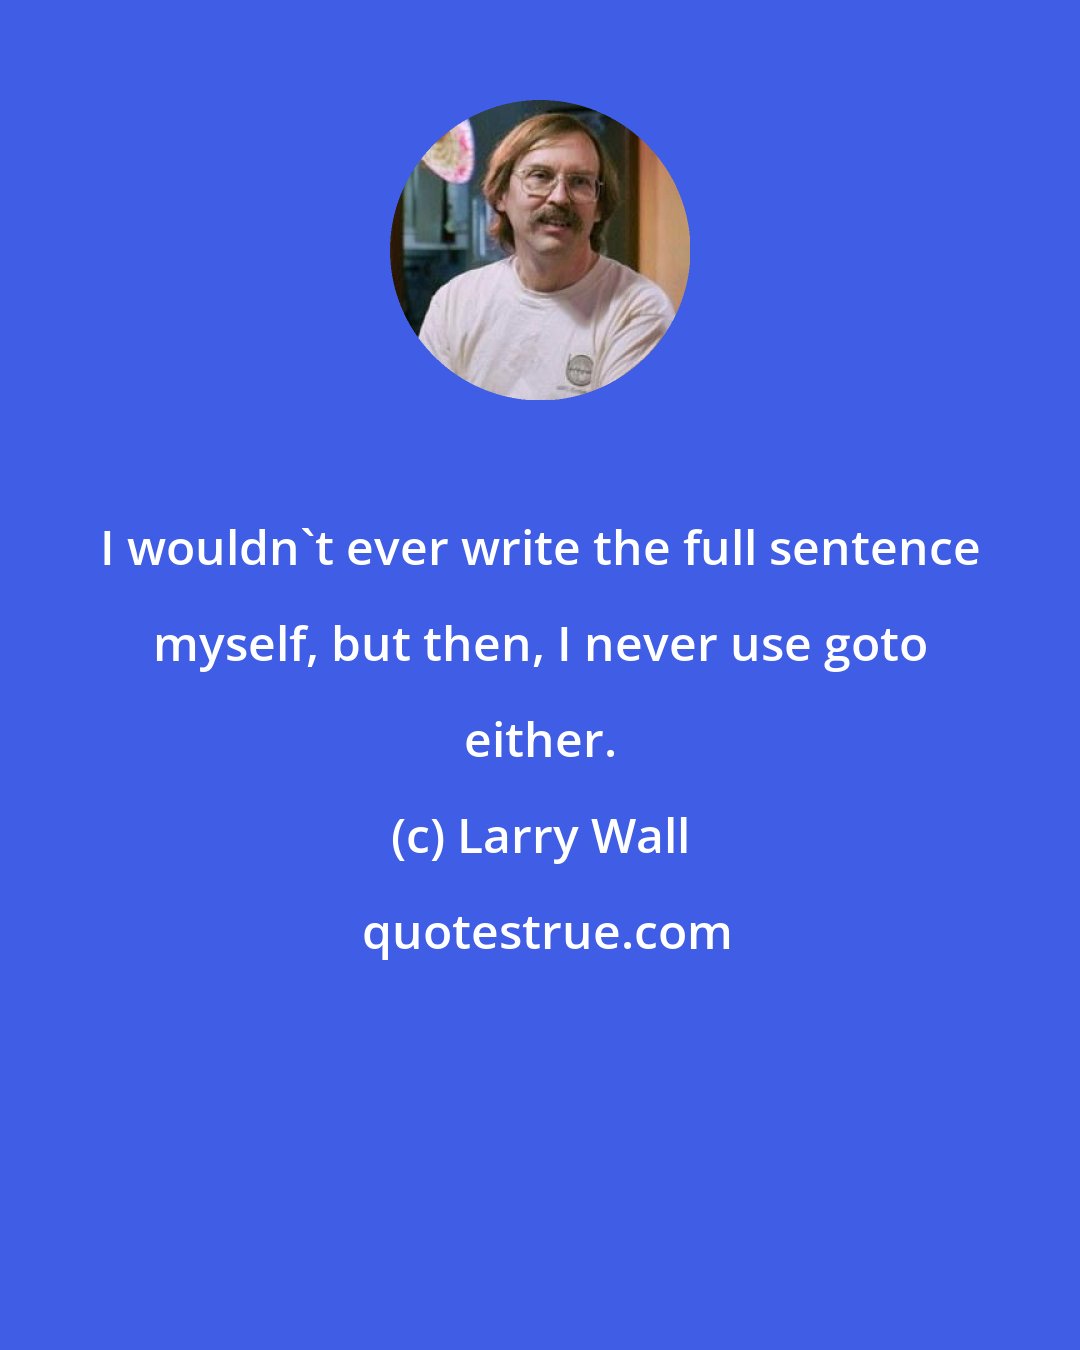 Larry Wall: I wouldn't ever write the full sentence myself, but then, I never use goto either.